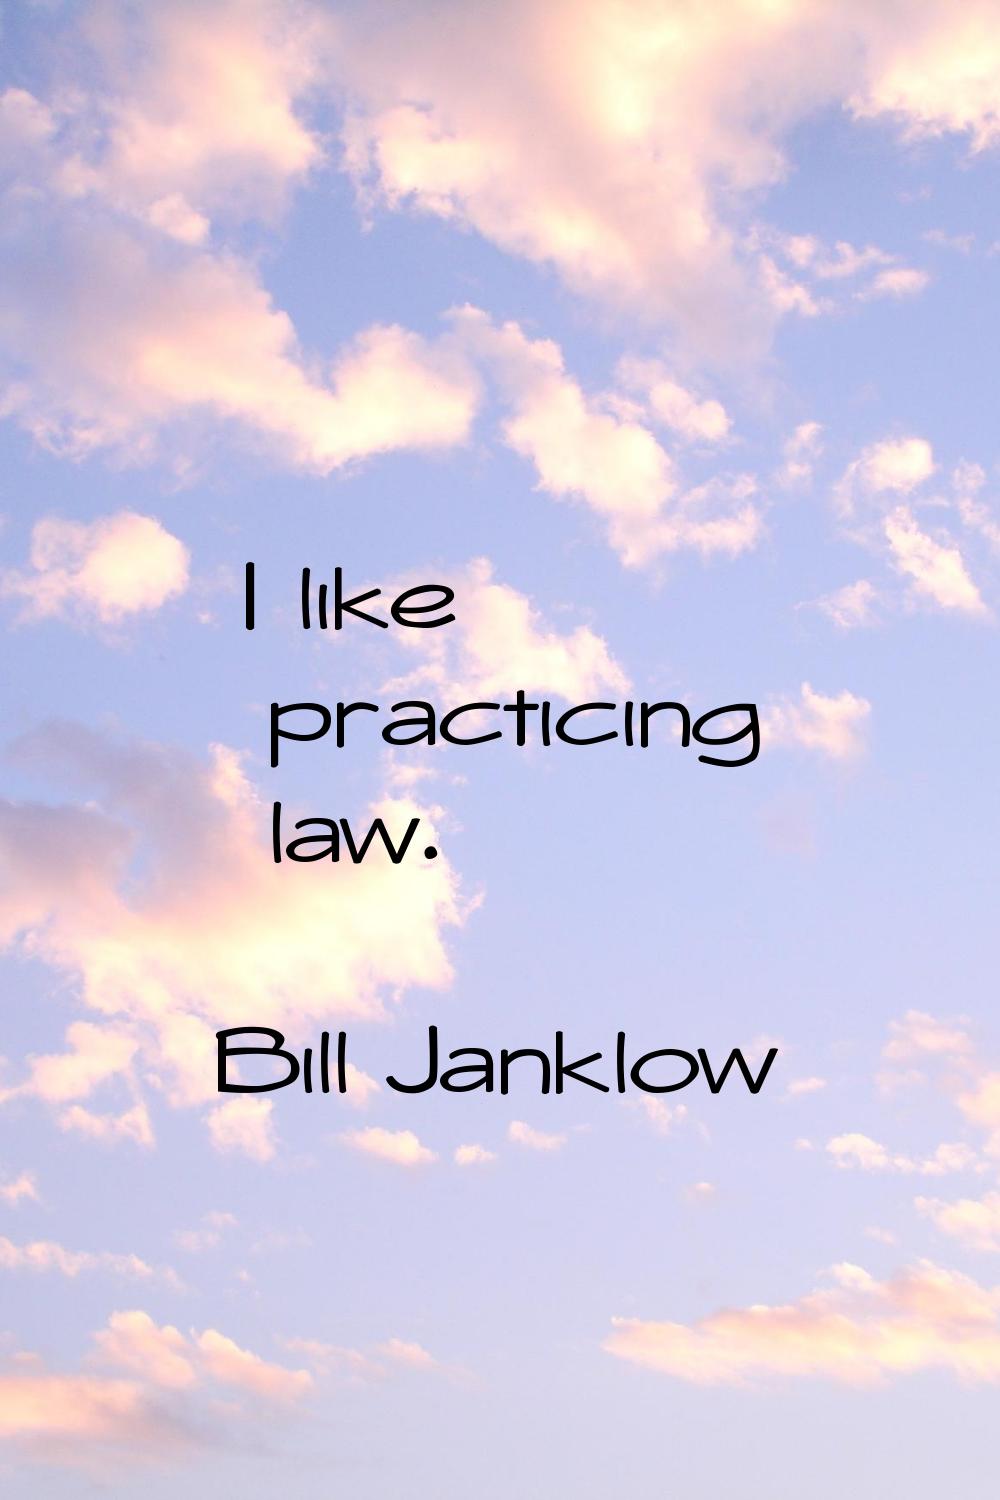 I like practicing law.